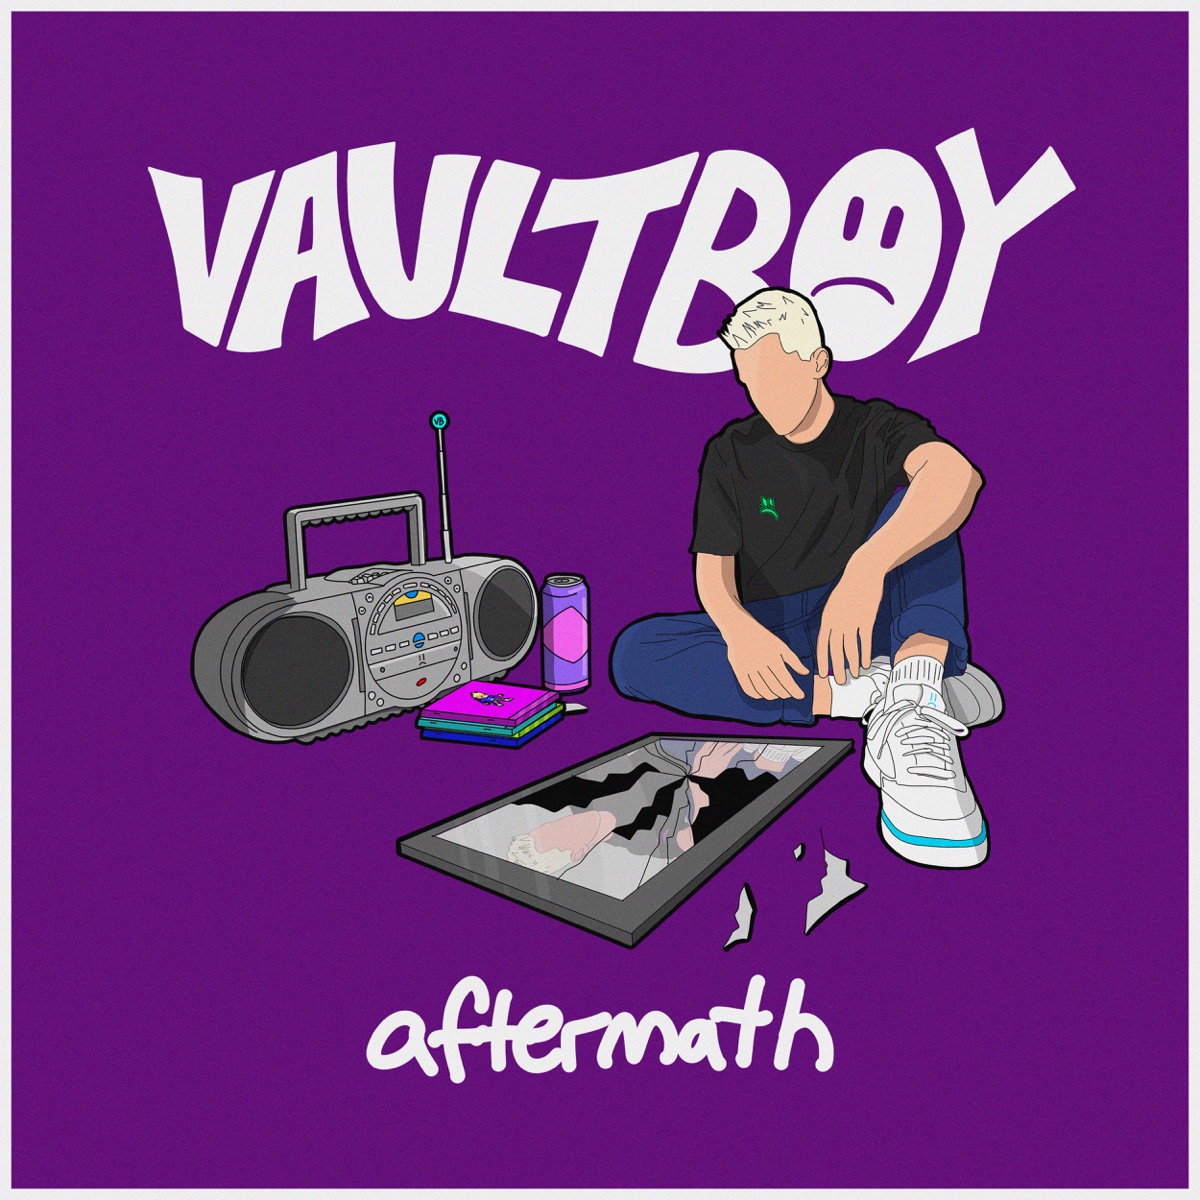 Vaultboy Everything, Everywhere Lyrics know the real meaning of